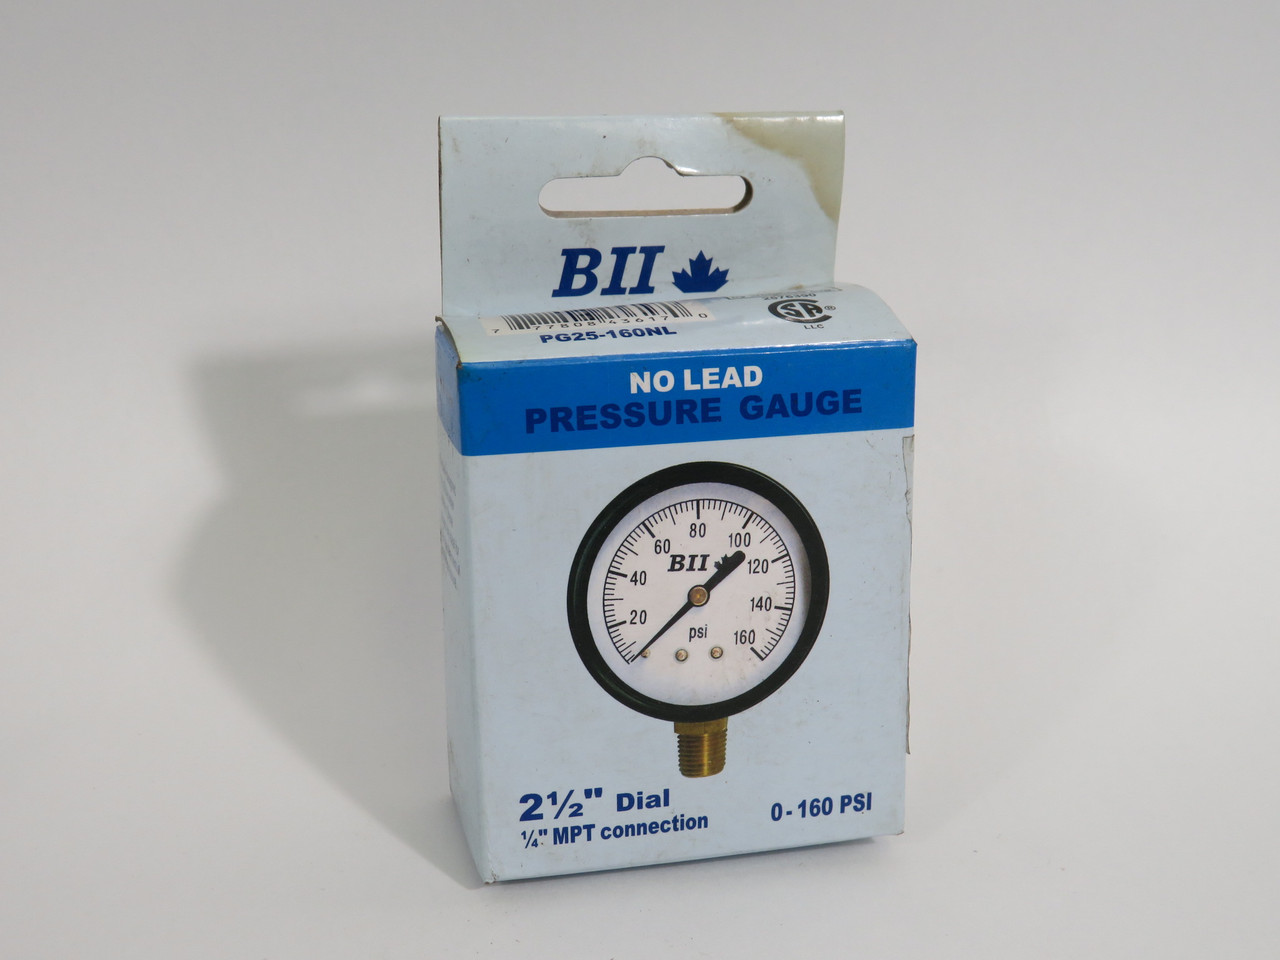 BII PG25-160NL 2-1/2"Dial Pressure Gauge 0-160Psi 1/4"Mpt Connection NEW